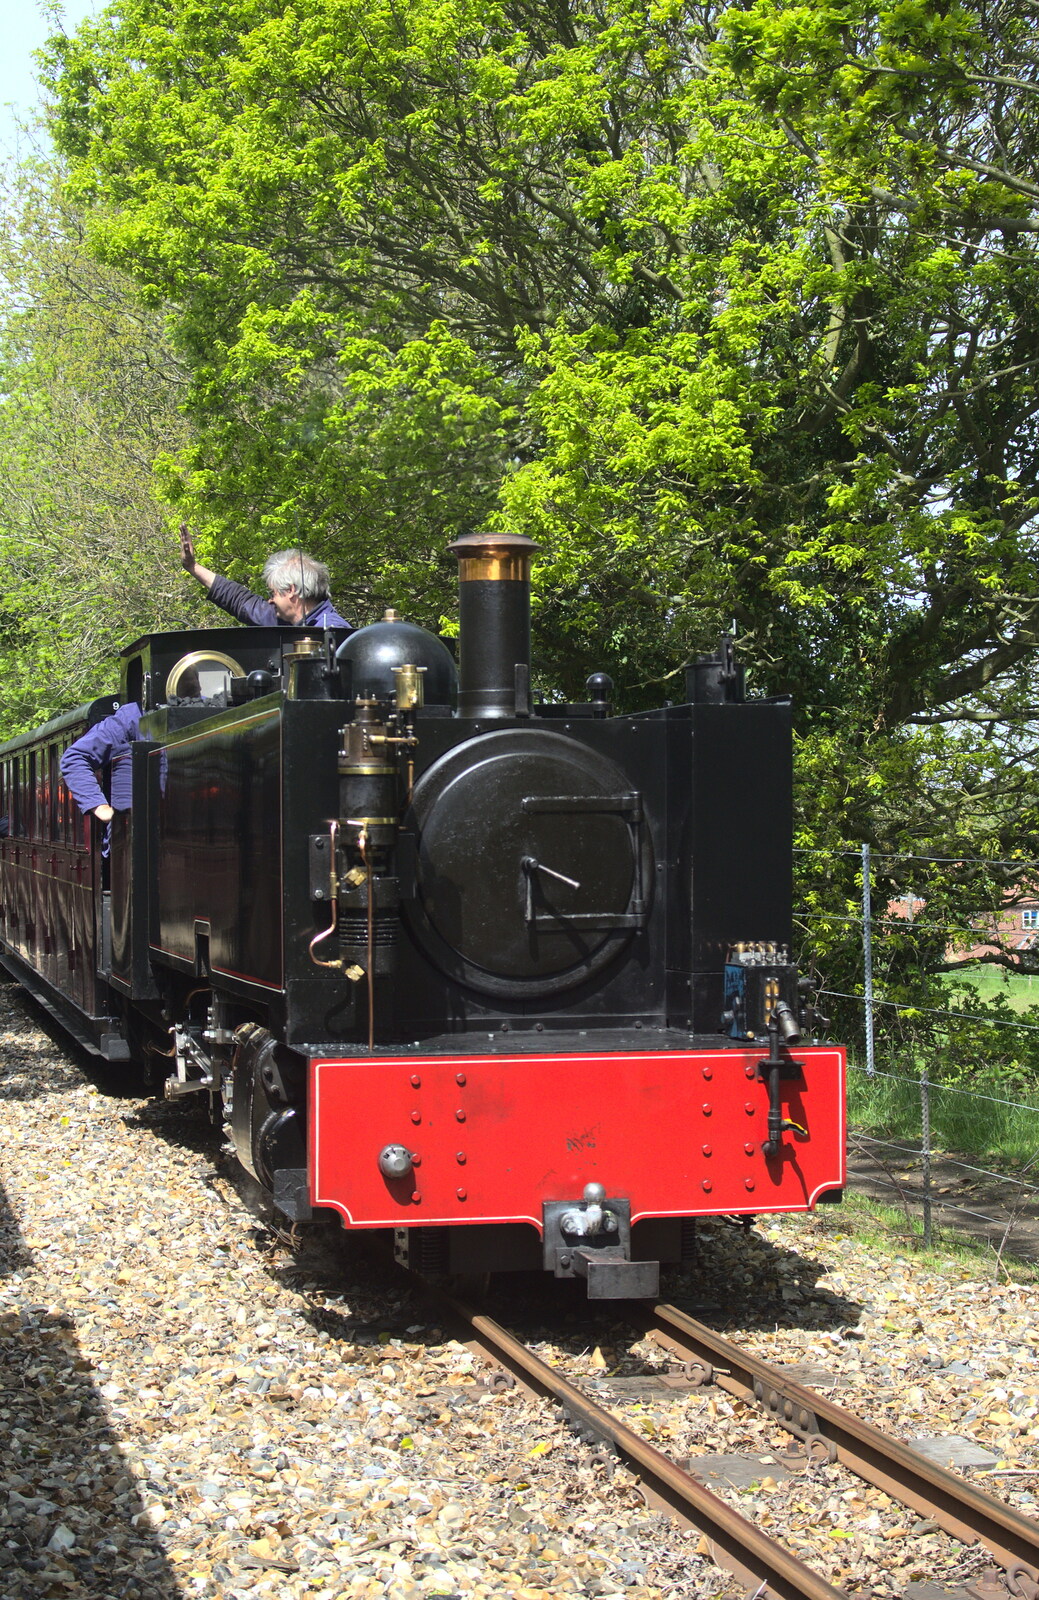 We pass the other train from The Bure Valley Railway, Aylsham, Norfolk - 26th May 2013